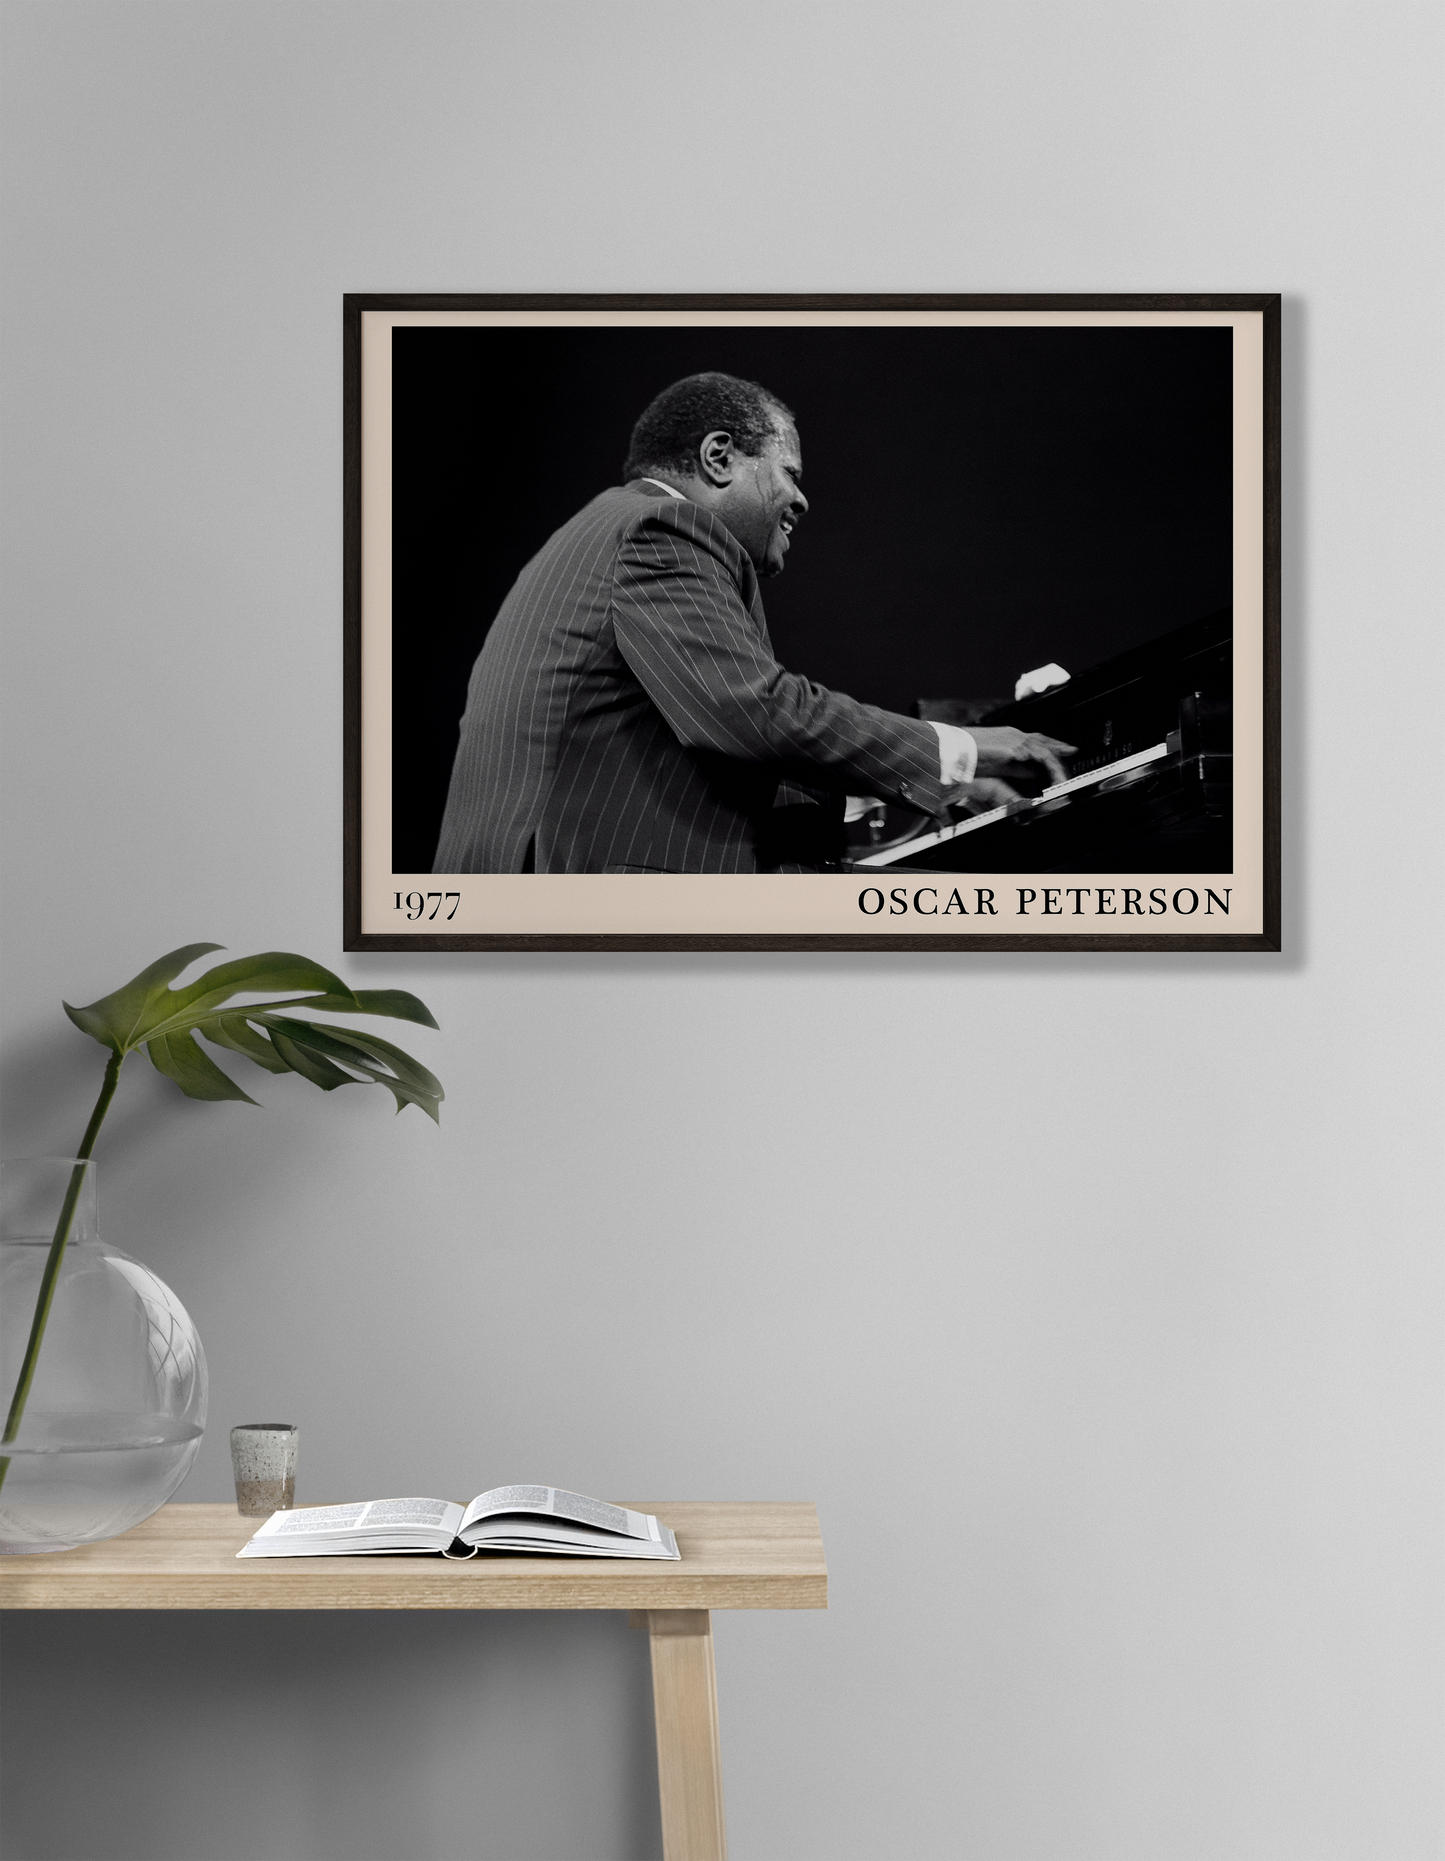 1977 photograph of Oscar Peterson taken by Thomas Marcello. Picture crafted into a cool black framed jazz print, with an off-white border. Poster is hanging on a off-white living room wall